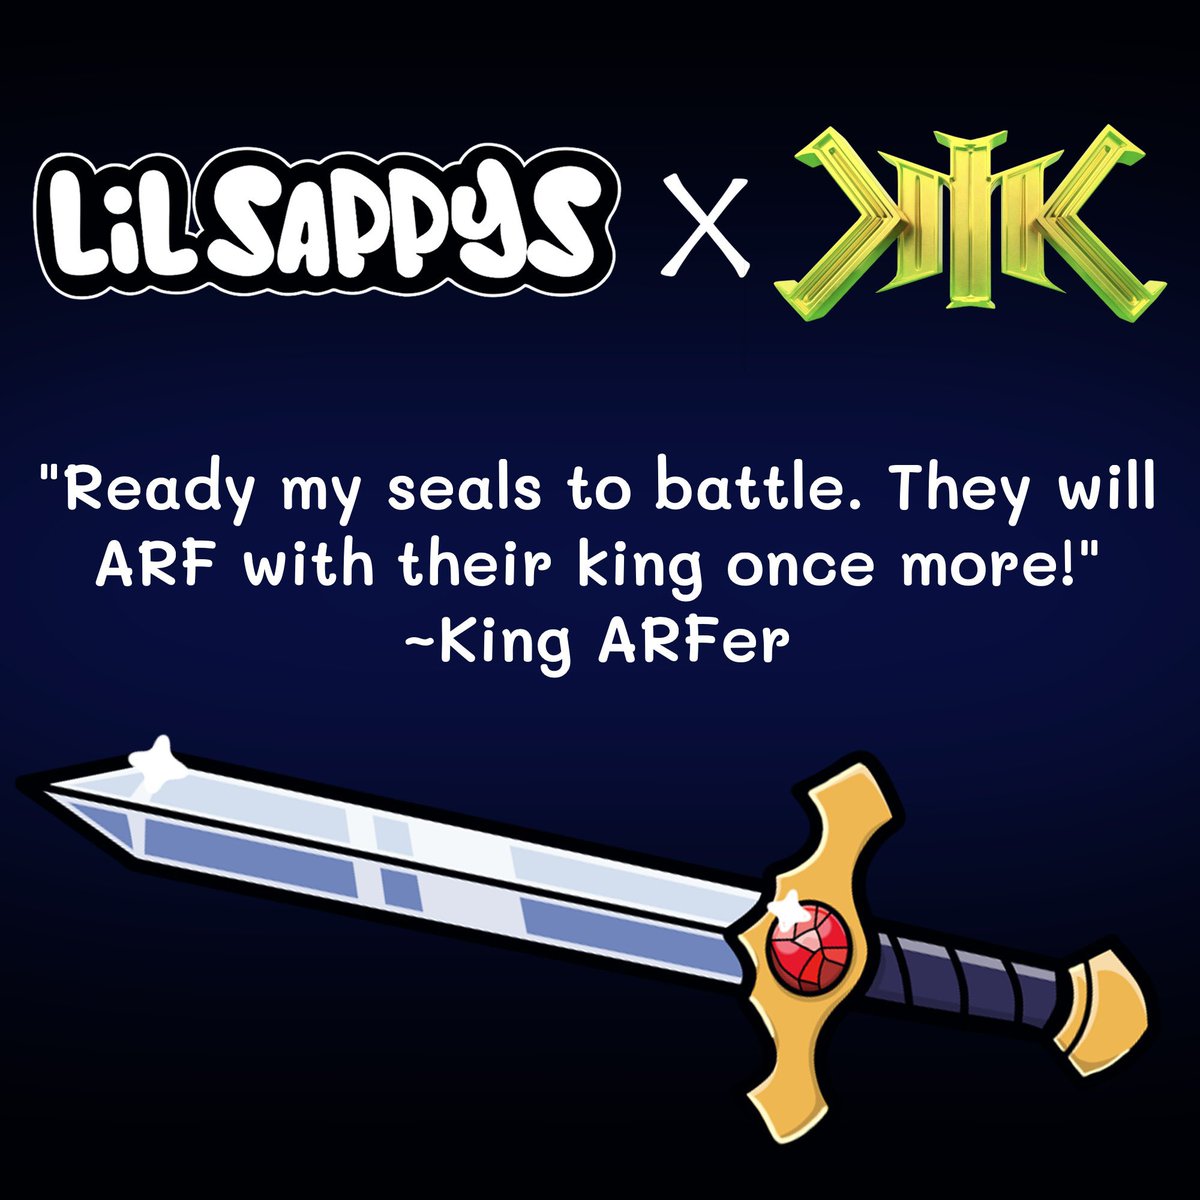 ARF!
🦭 X 🐸 
Happy to announce our partnership with @fightforcmc, where Lil Sappys x FFCMC unite. 

Join us as King ARFer and other heroes come to life in an epic world of 2D Anime, rich lore, 3D animations, and a thrilling fighting game.

Coming Soon…….